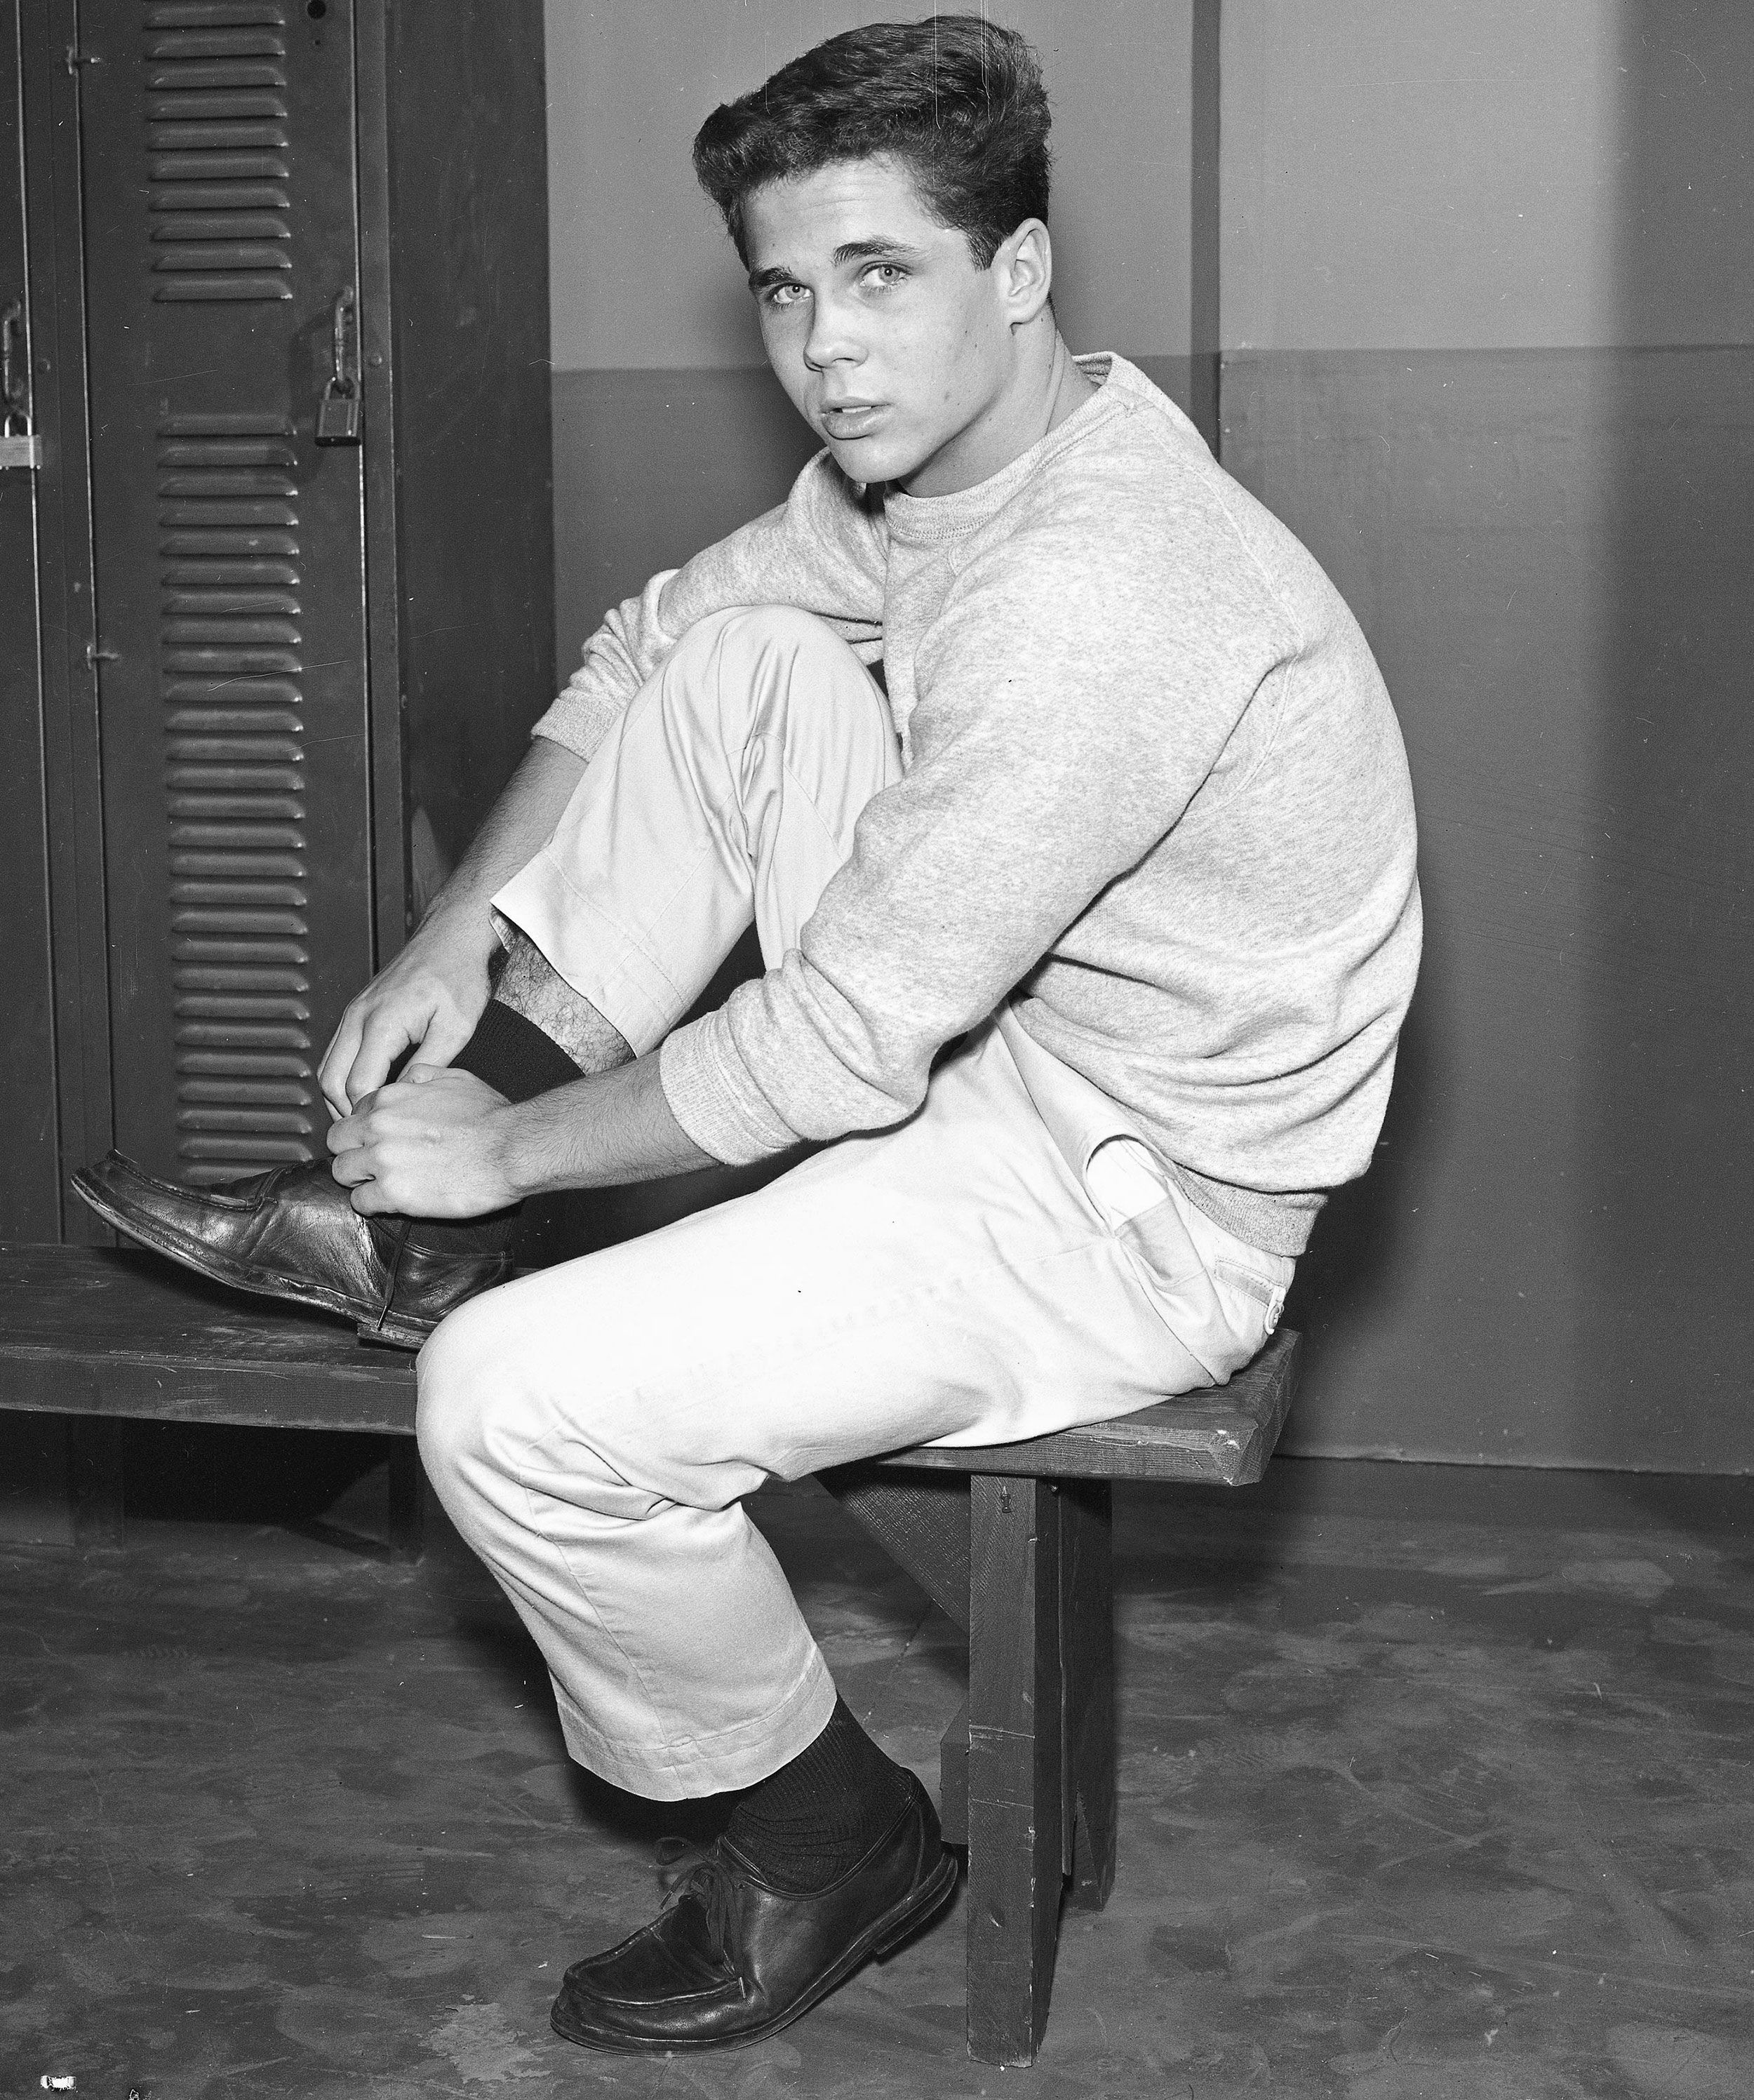 Tony Dow, 'Leave It to Beaver' star, has died | CNN